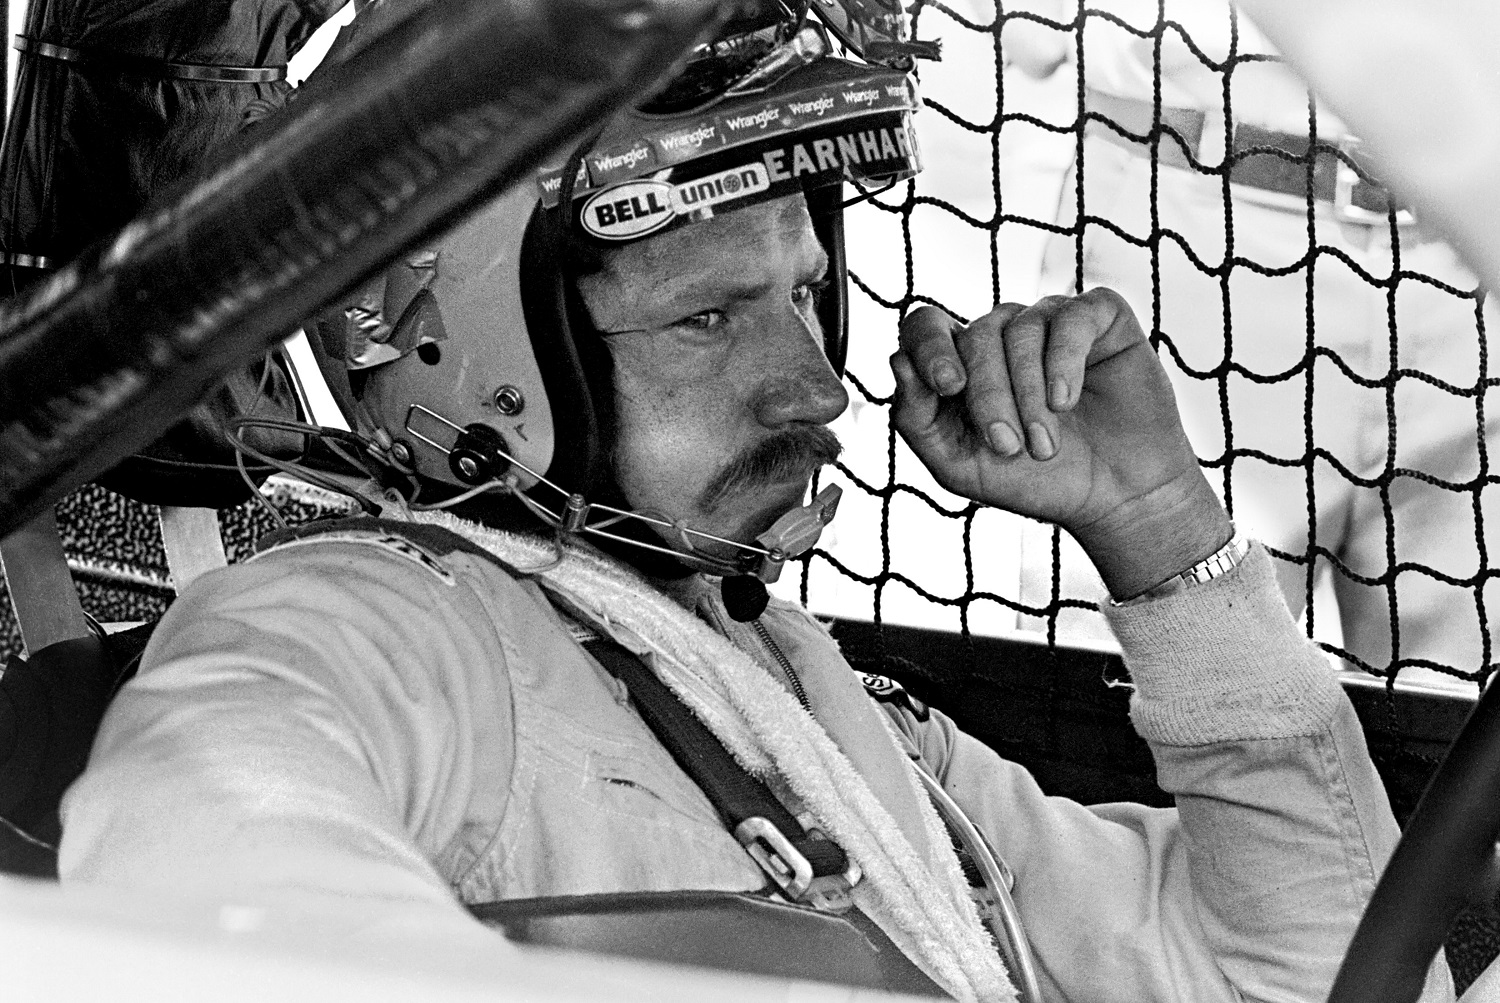 NASCAR driver Dale Earnhardt Sr. sits in his car while it is repaired after an accident during the Firecracker 400 on July 4, 1981 at the Daytona International Speedway. | Robert Alexander/Archive Photos/Getty Images